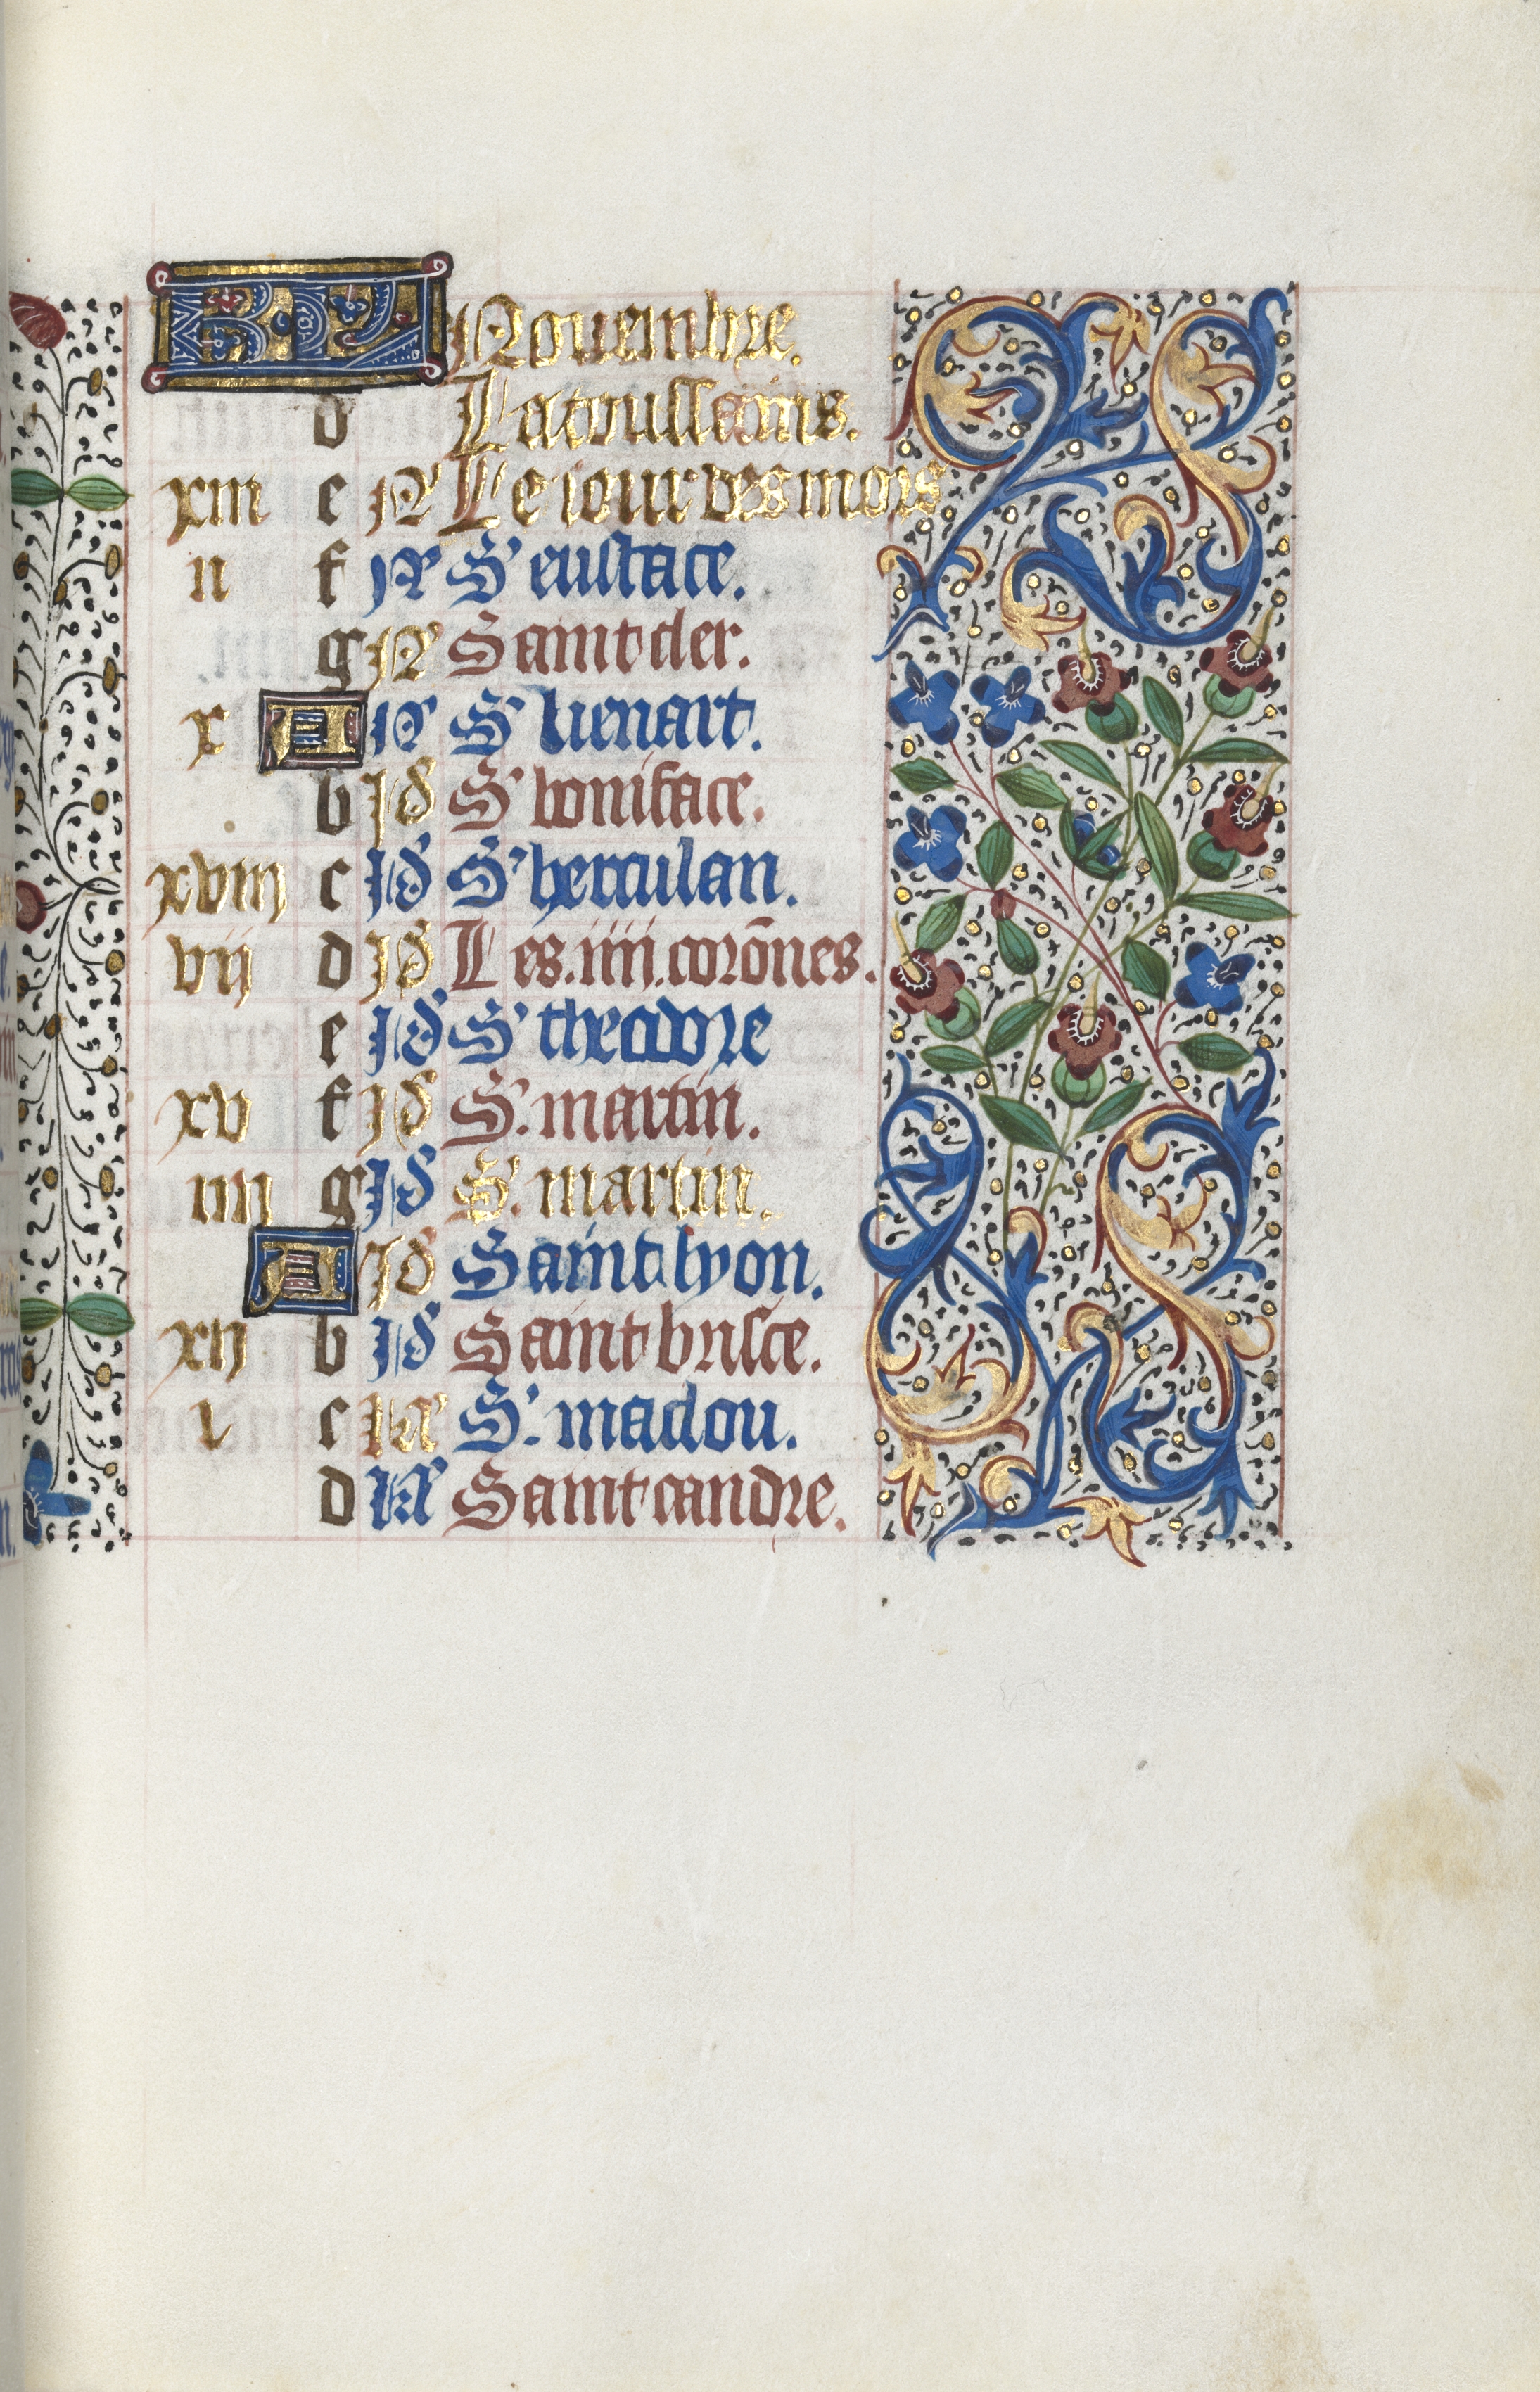 Book of Hours (Use of Rouen): fol. 111r, Calendar Page for November